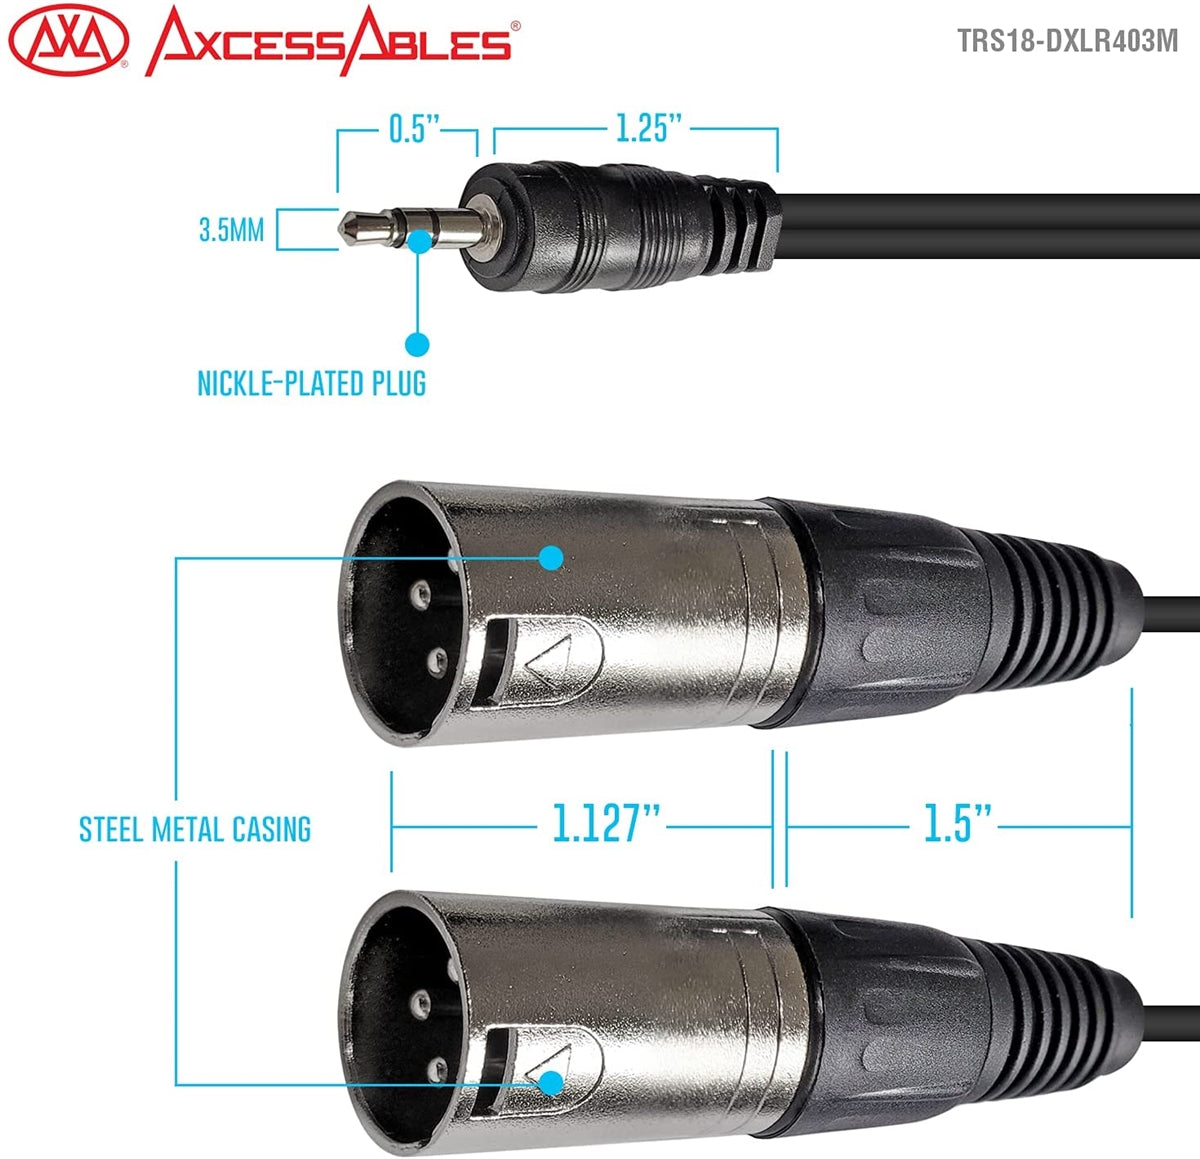 AxcessAbles 1/8 Stereo Male Mini-Jack to Dual Male XLR Audio Cable - 10ft | 1/8 TRS to Dual XLR Male Y-Splitter Cable | 3.5mm Stereo Mini-Jack Male to 2 XLR Male | AxcessAbles AXCTRS18-DXLR403M 10ft